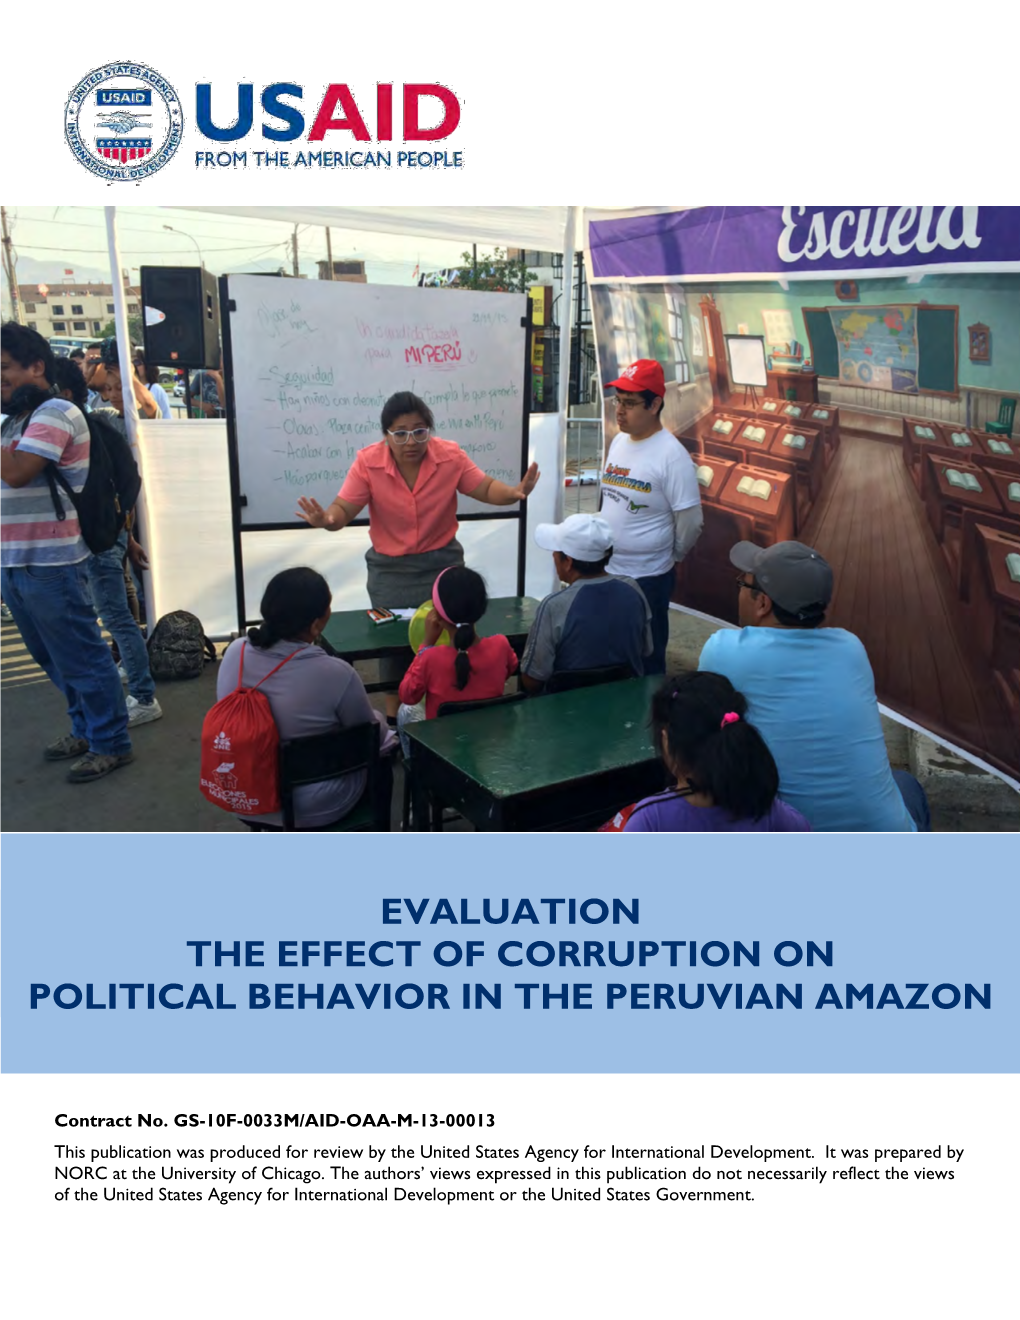 The Effect of Corruption on Political Behavior in the Peruvian Amazon